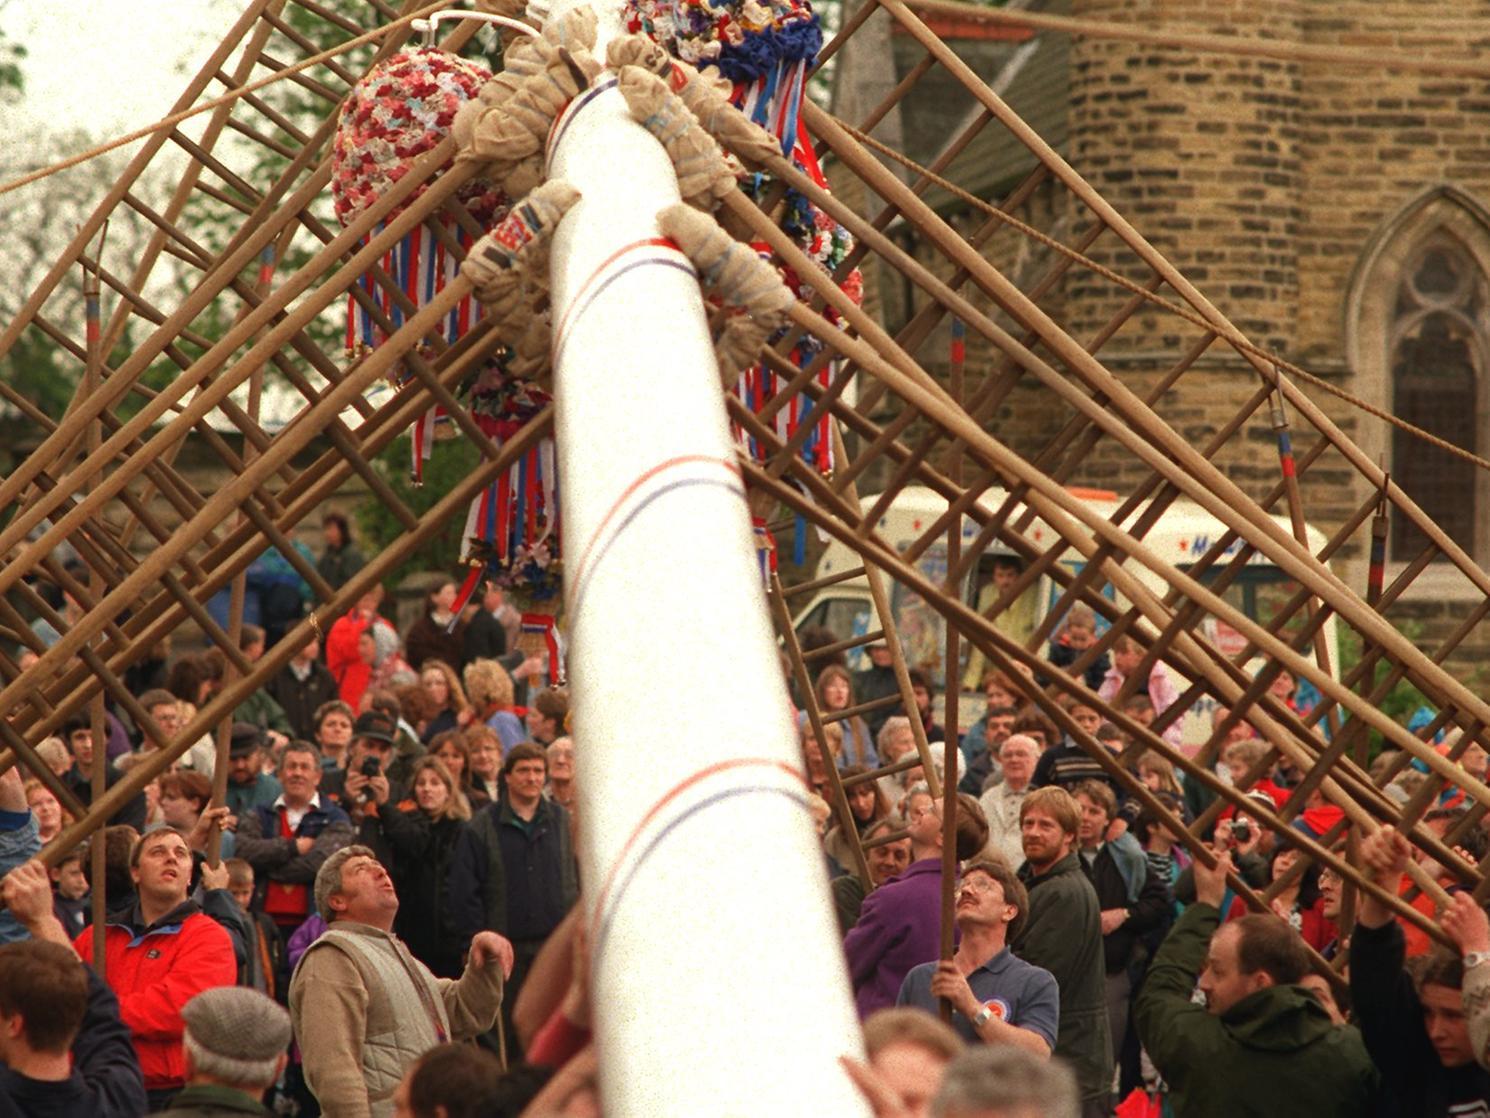 The triennial Maypole Festival at Barwick-in-Elmet in May 1996 and in accordance with the time honoured custom, the maypole was successfully raised by the use of ropes and ladders and an enthusiastic crowd of villagers and visitors.